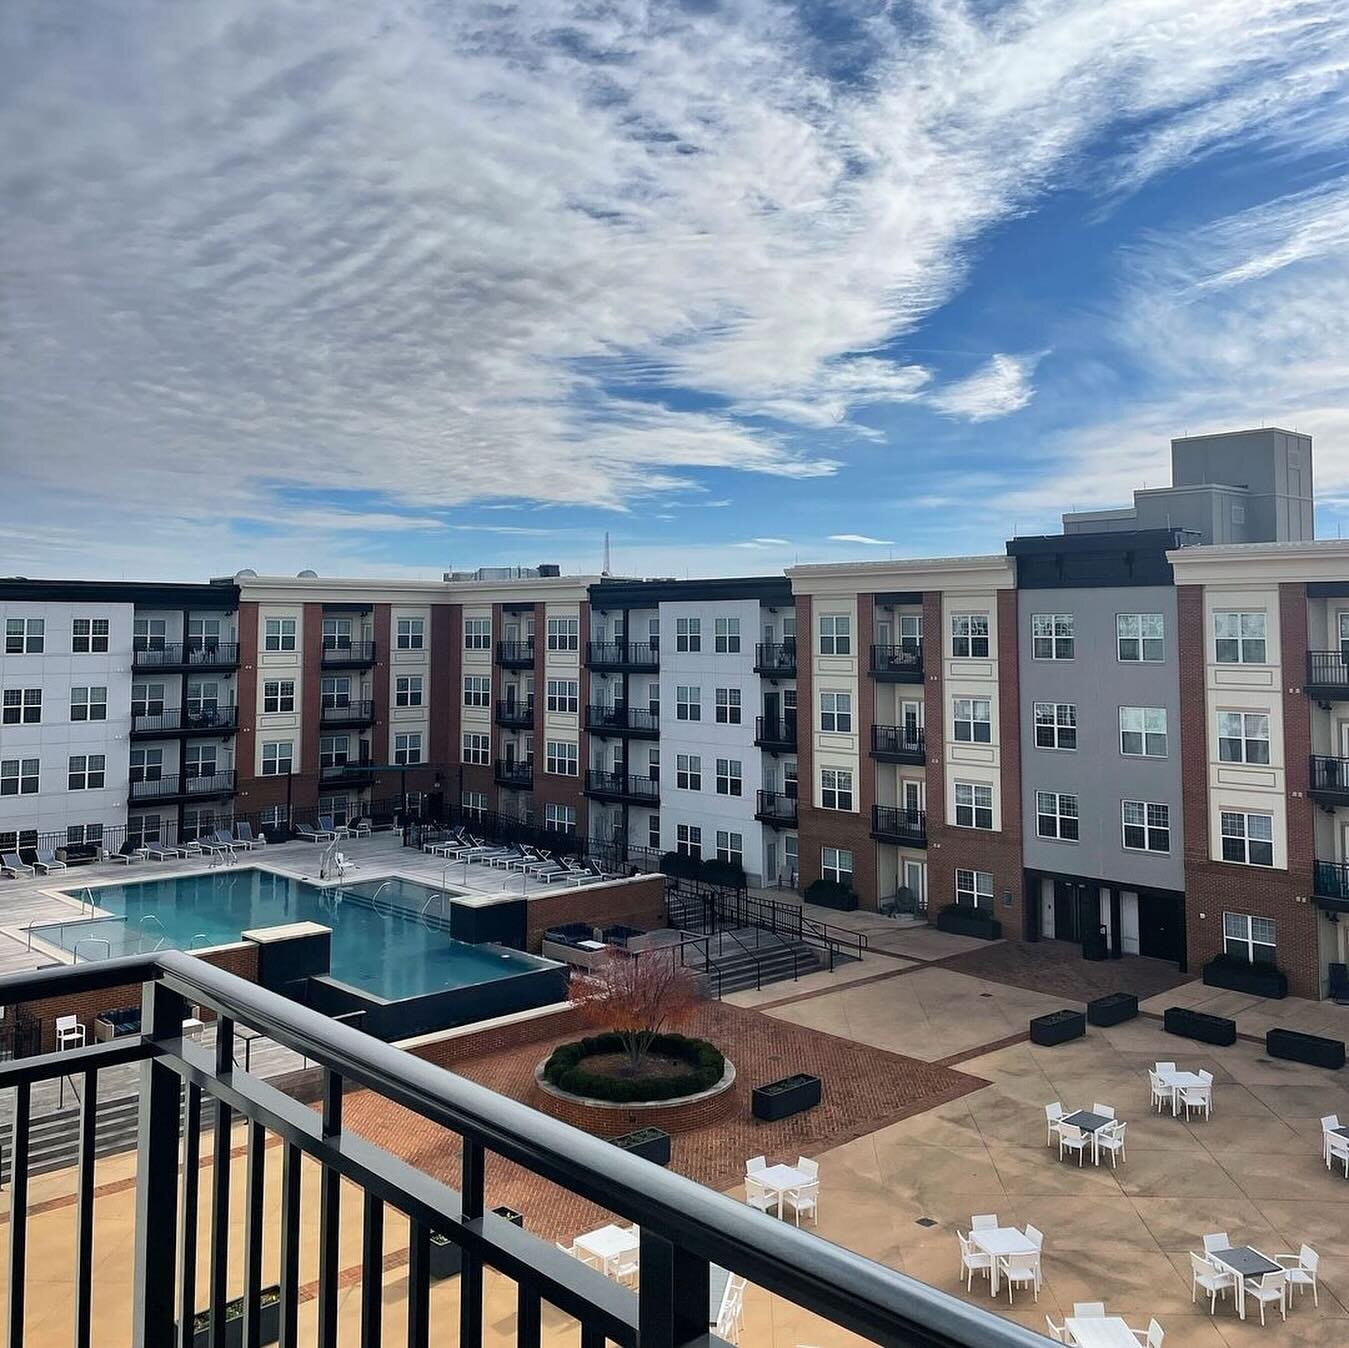 The @penstockquarter courtyard from two different views 😍🌤️

Did you know that almost every apartment in this community has a private balcony? Whether you want to enjoy some fresh air with your neighbors or in the privacy of your own home, you have